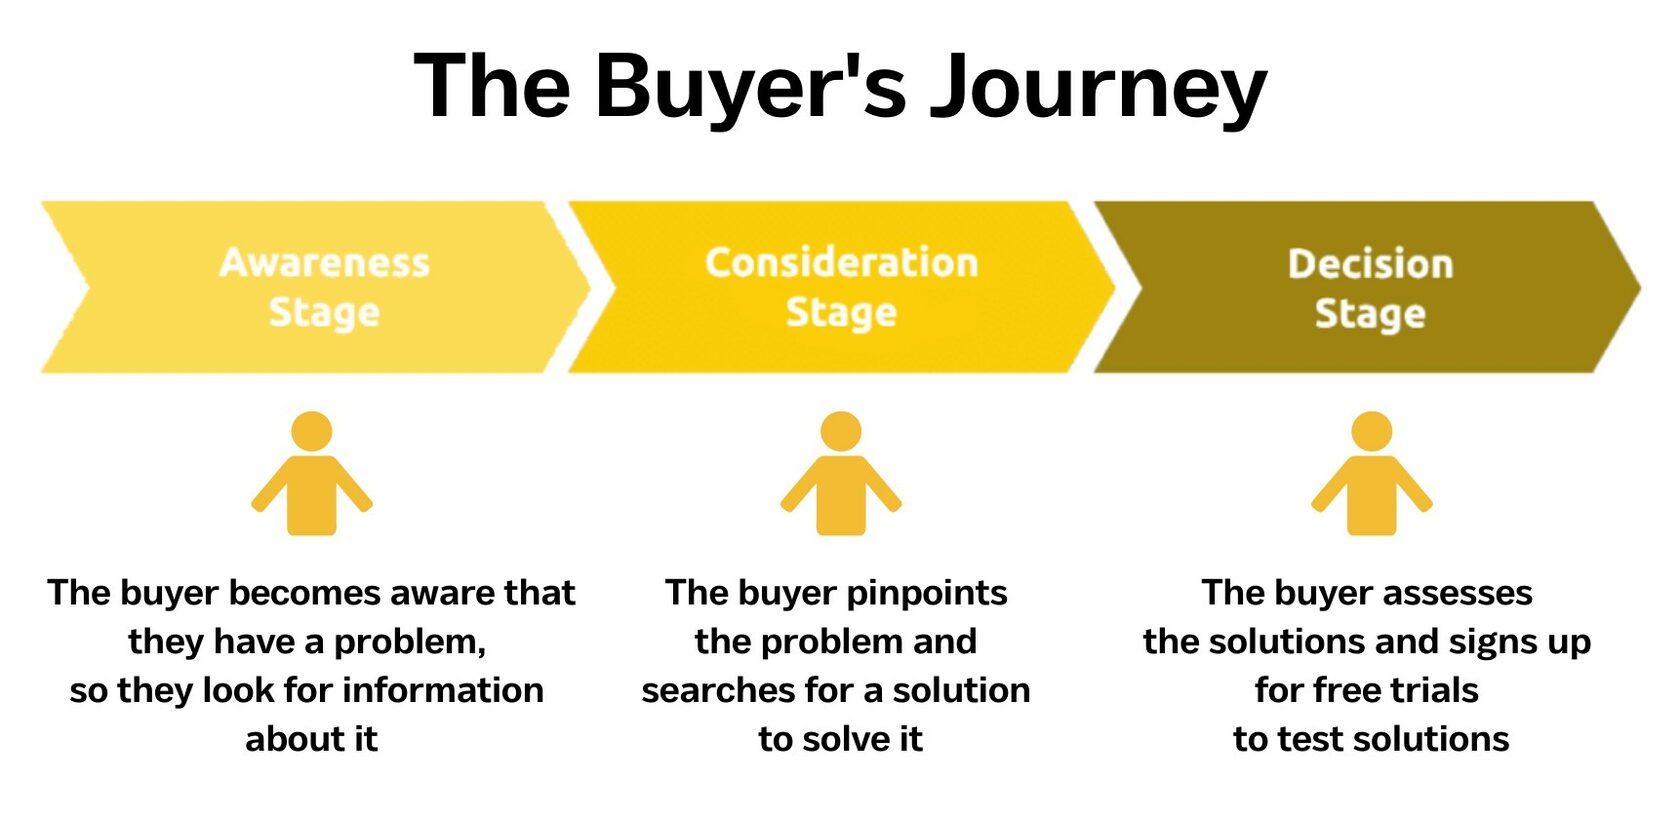 3 main stages of the buyer's journey